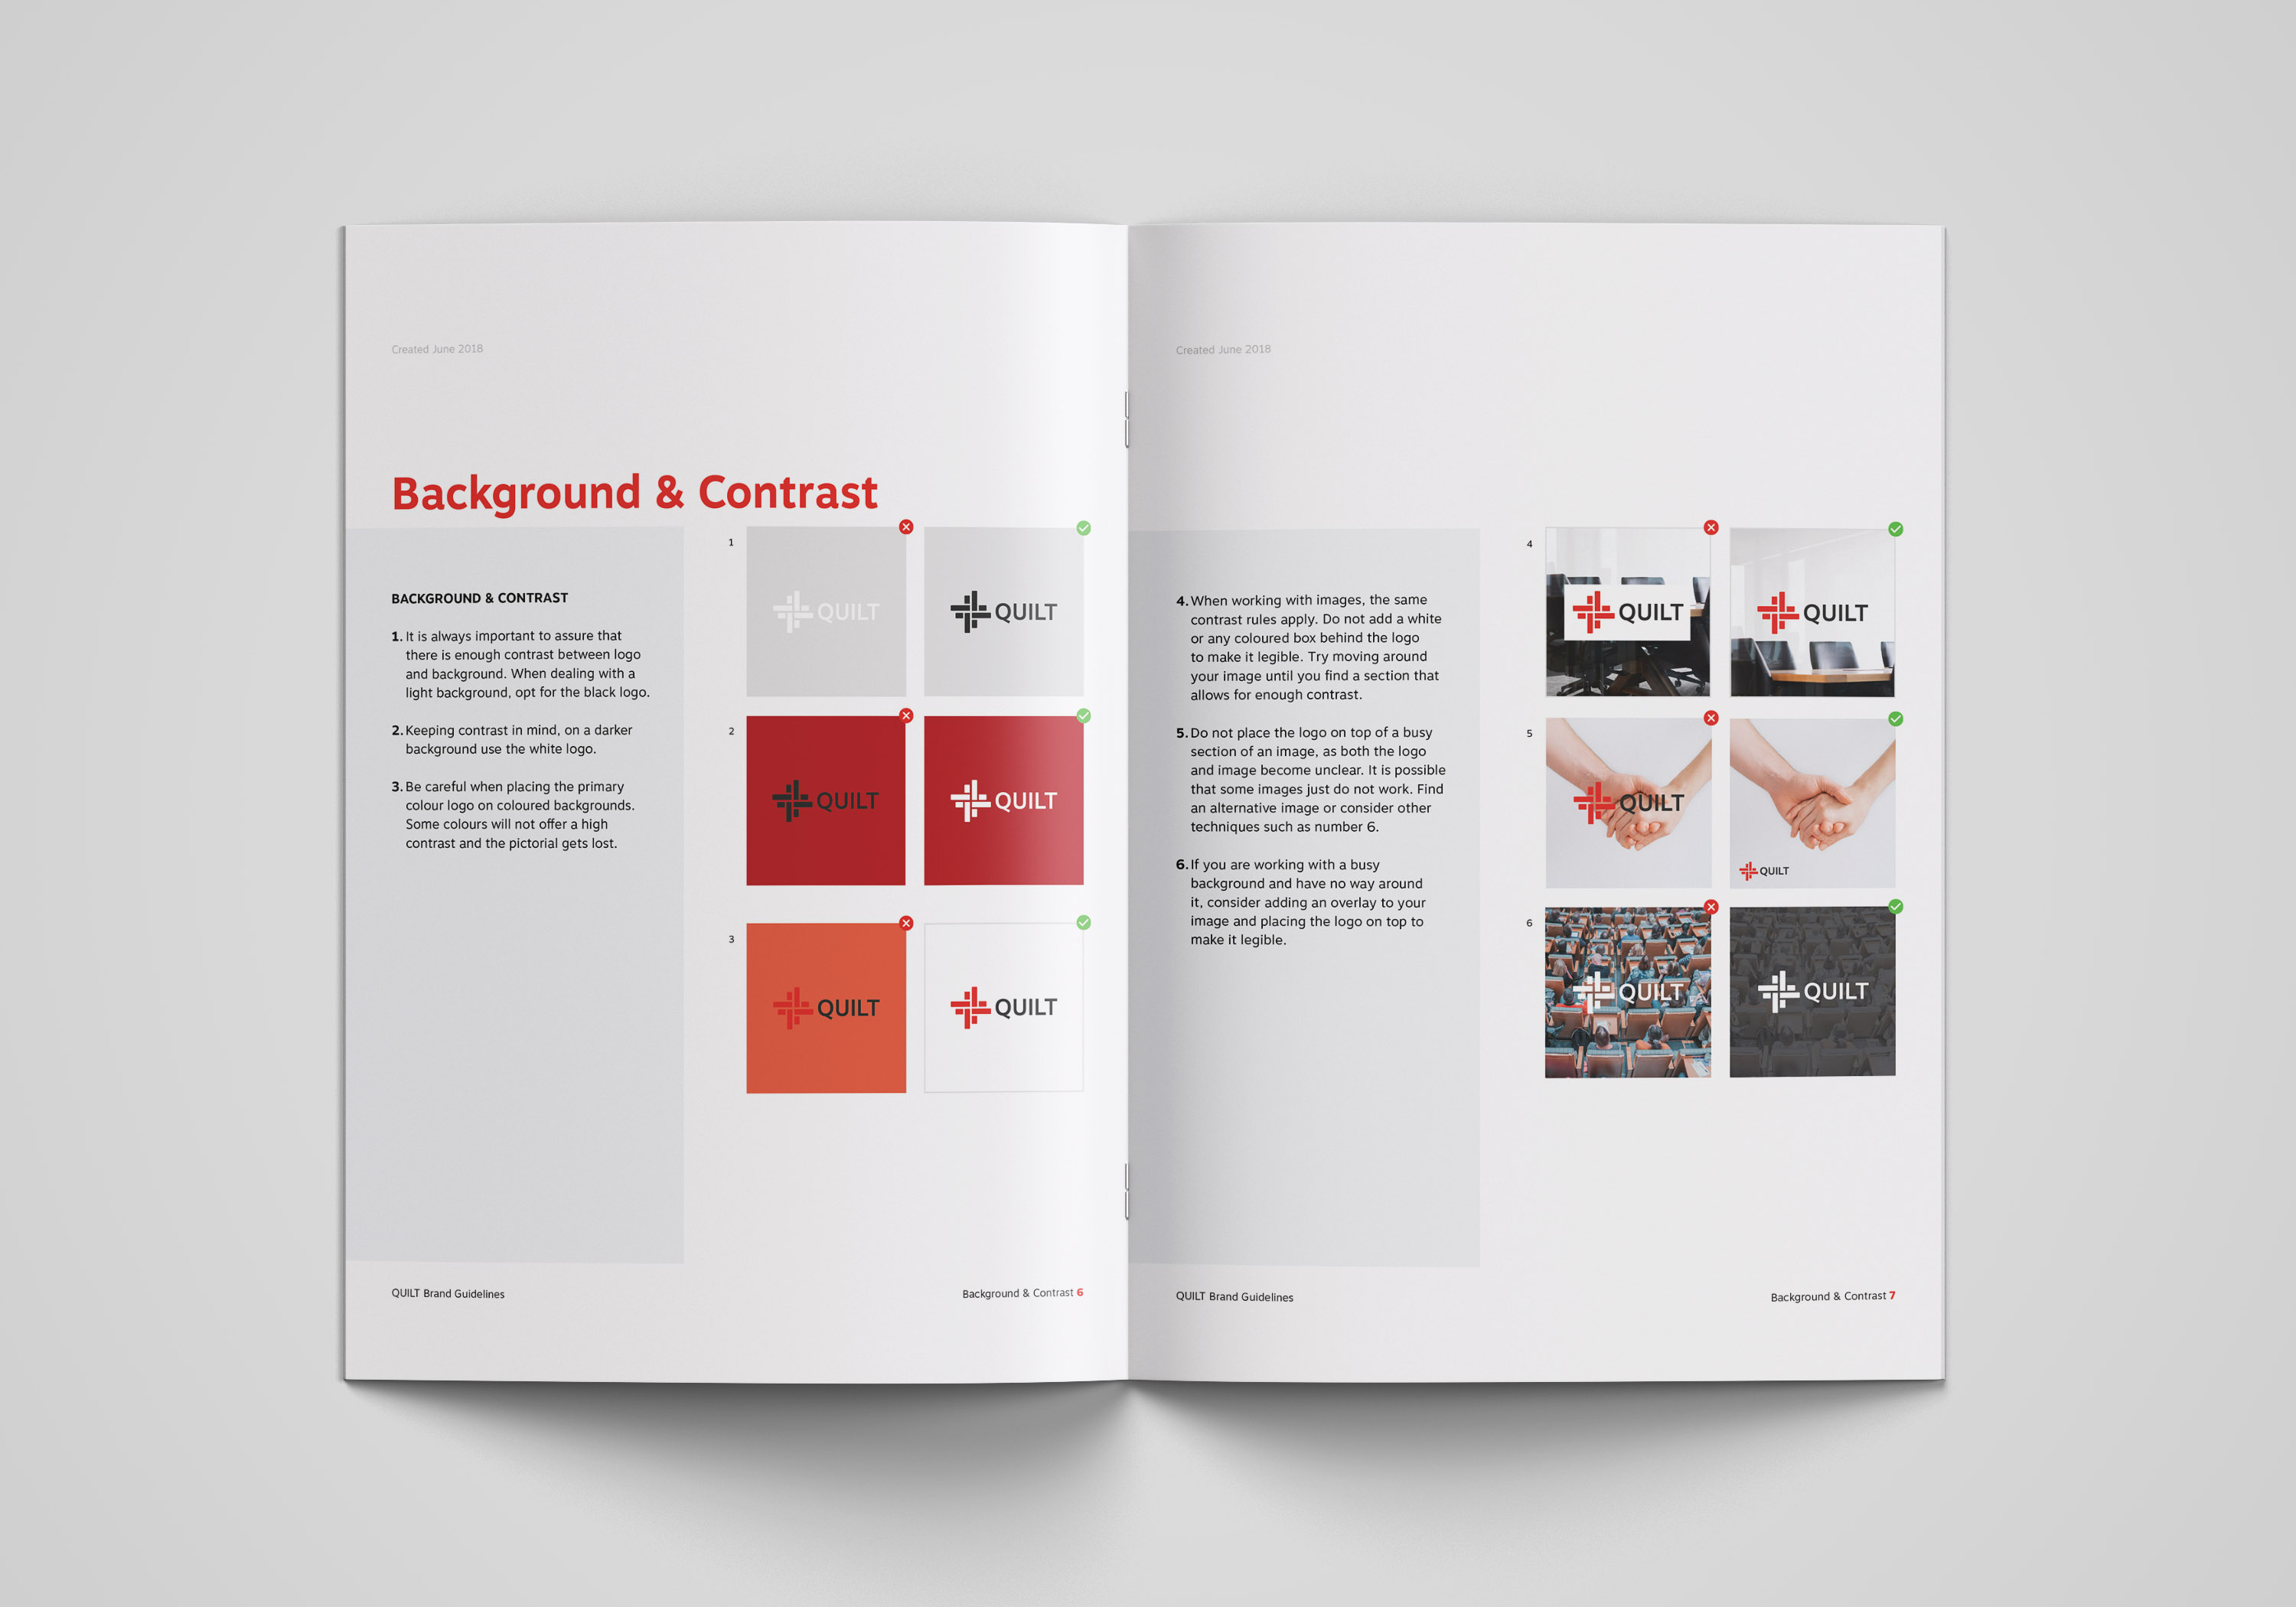 Branding guidelines spread about background and contrast as well as using the logo on photography.